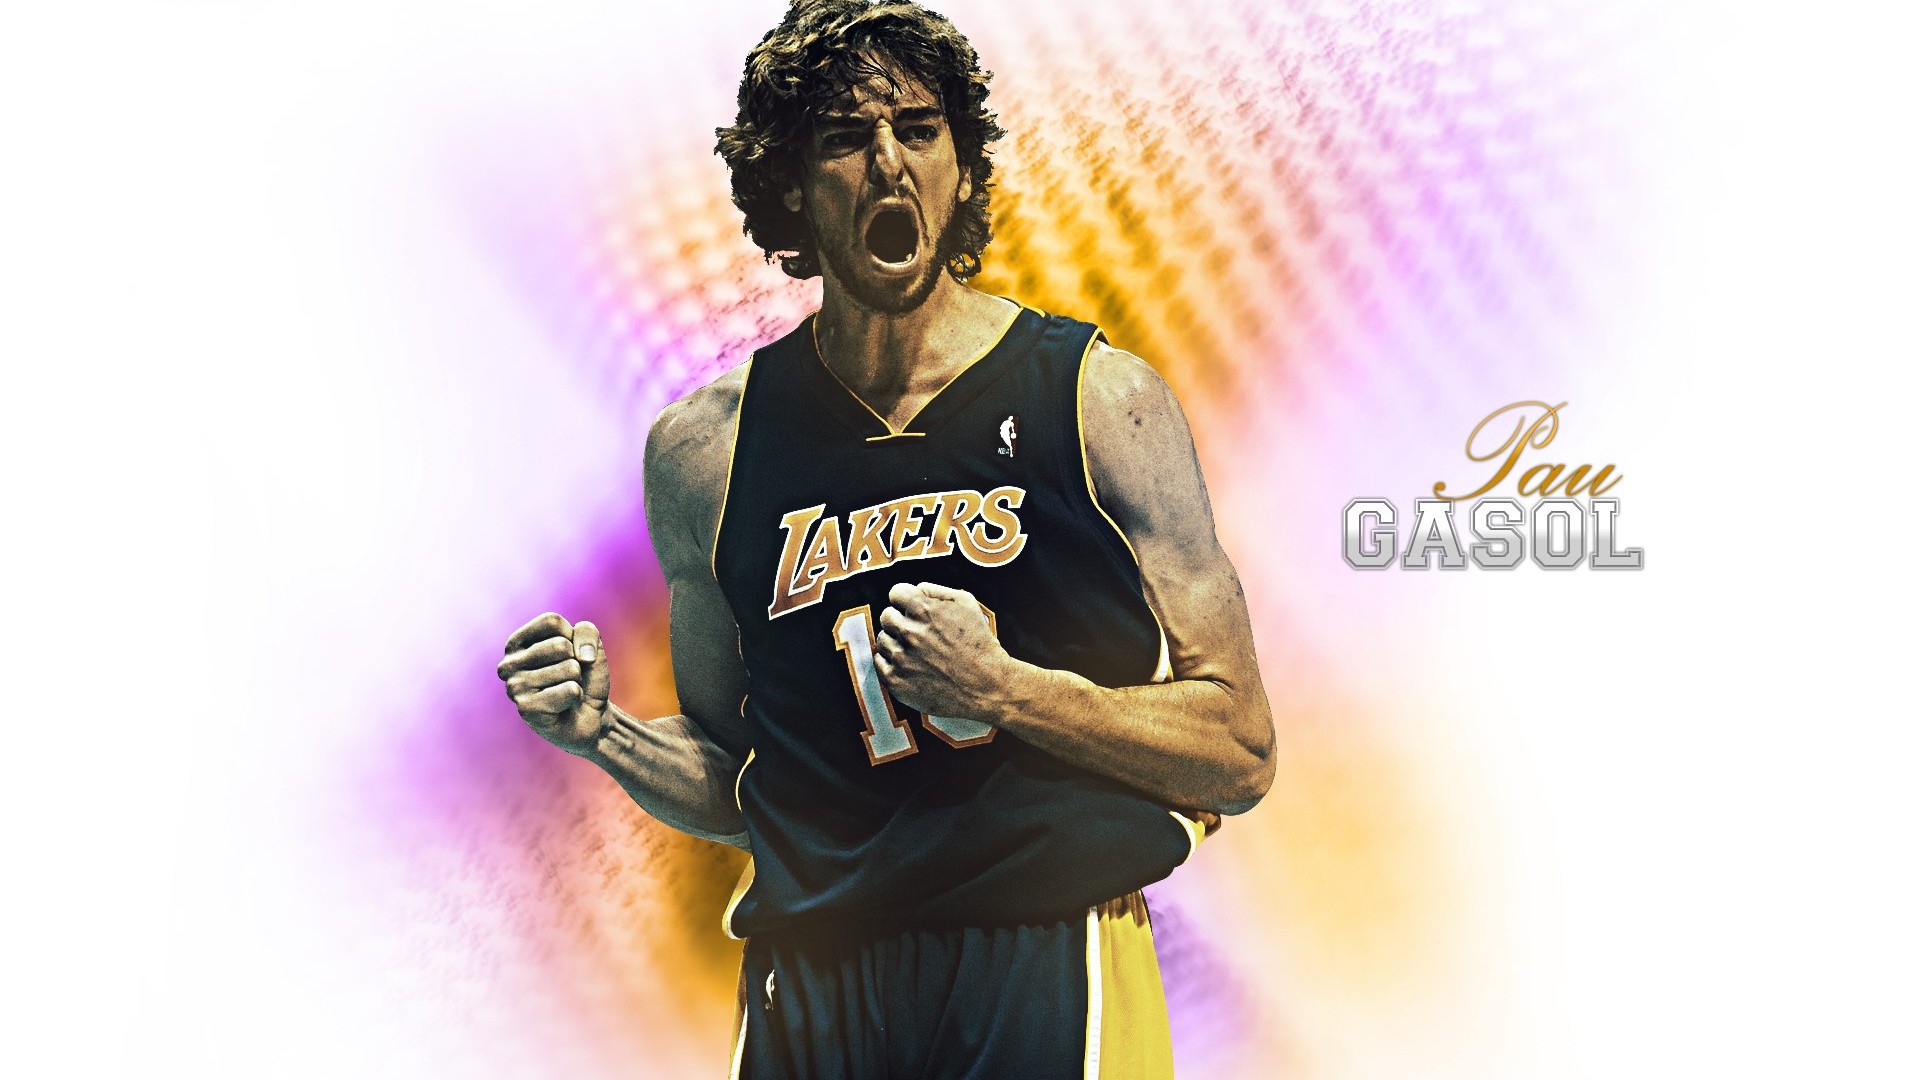 Los Angeles Lakers Wallpaper Oficial #21 - 1920x1080